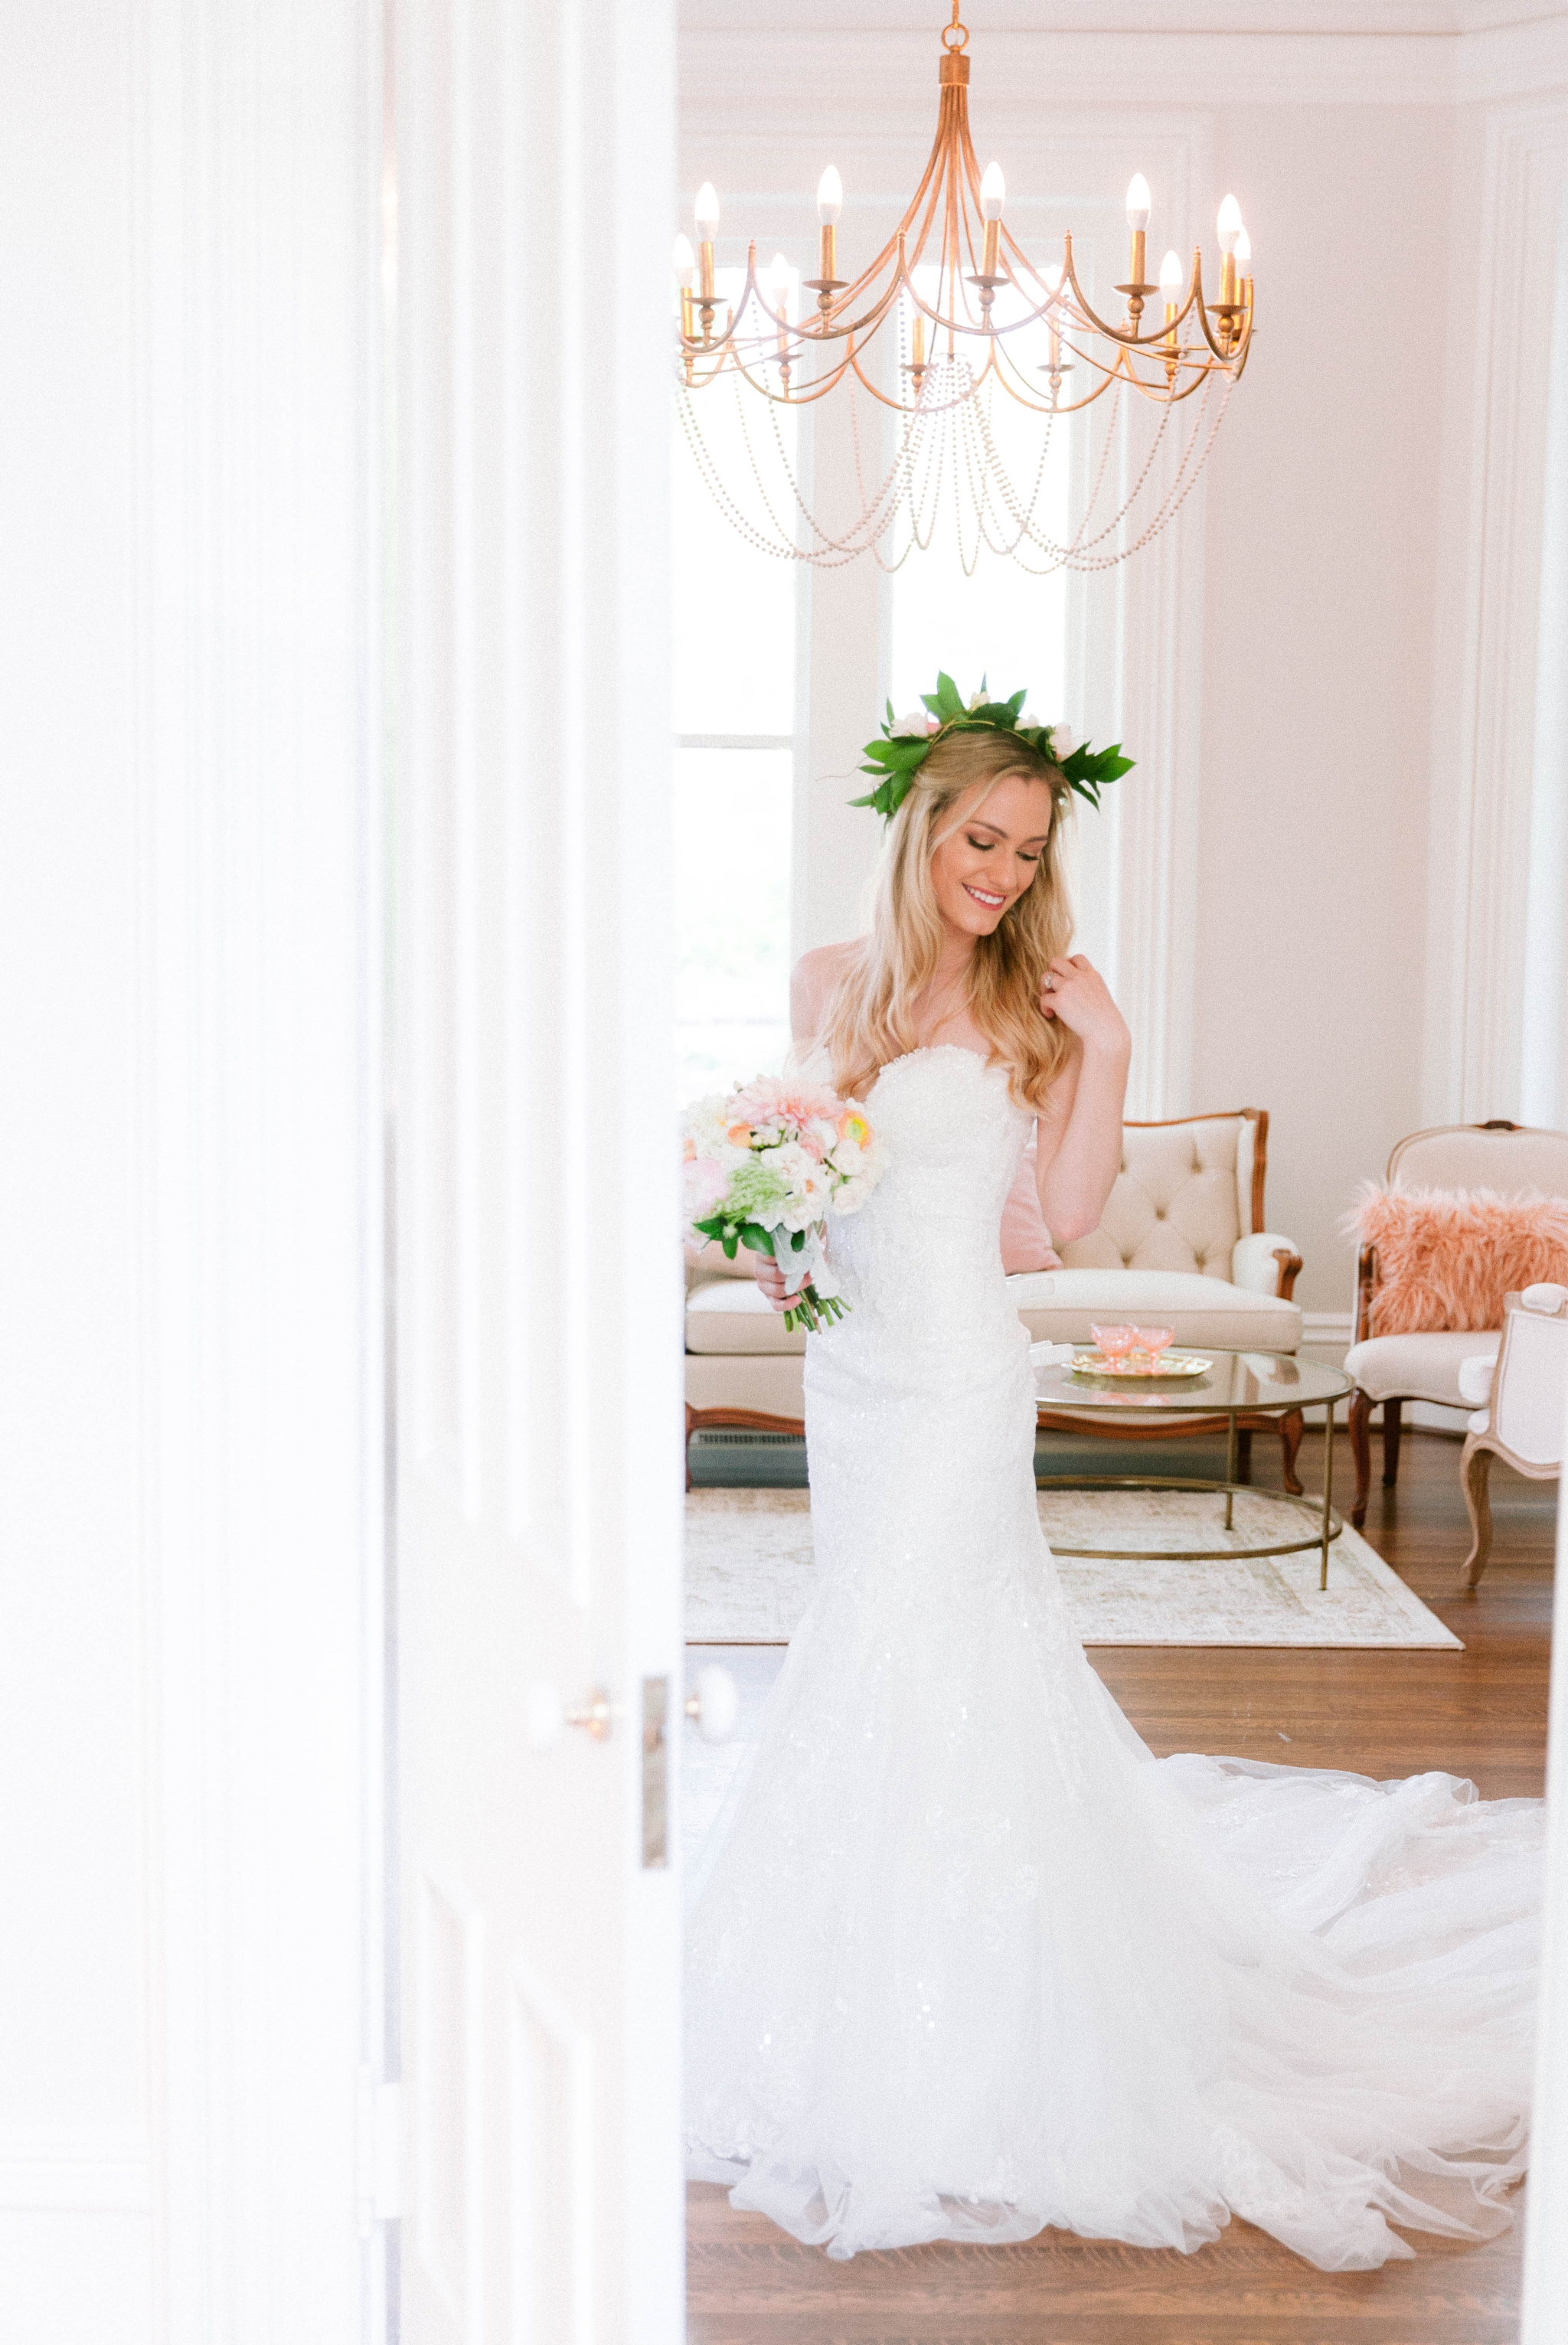  Indoor Bridal Portraits in an all white room at a luxury estate with natural light before the ceremony - Bride is wearing a Hawaiian Flower Crown in a Wedding Gown by Stella York and standing in the doorway with a golden chandelier with vintage furn